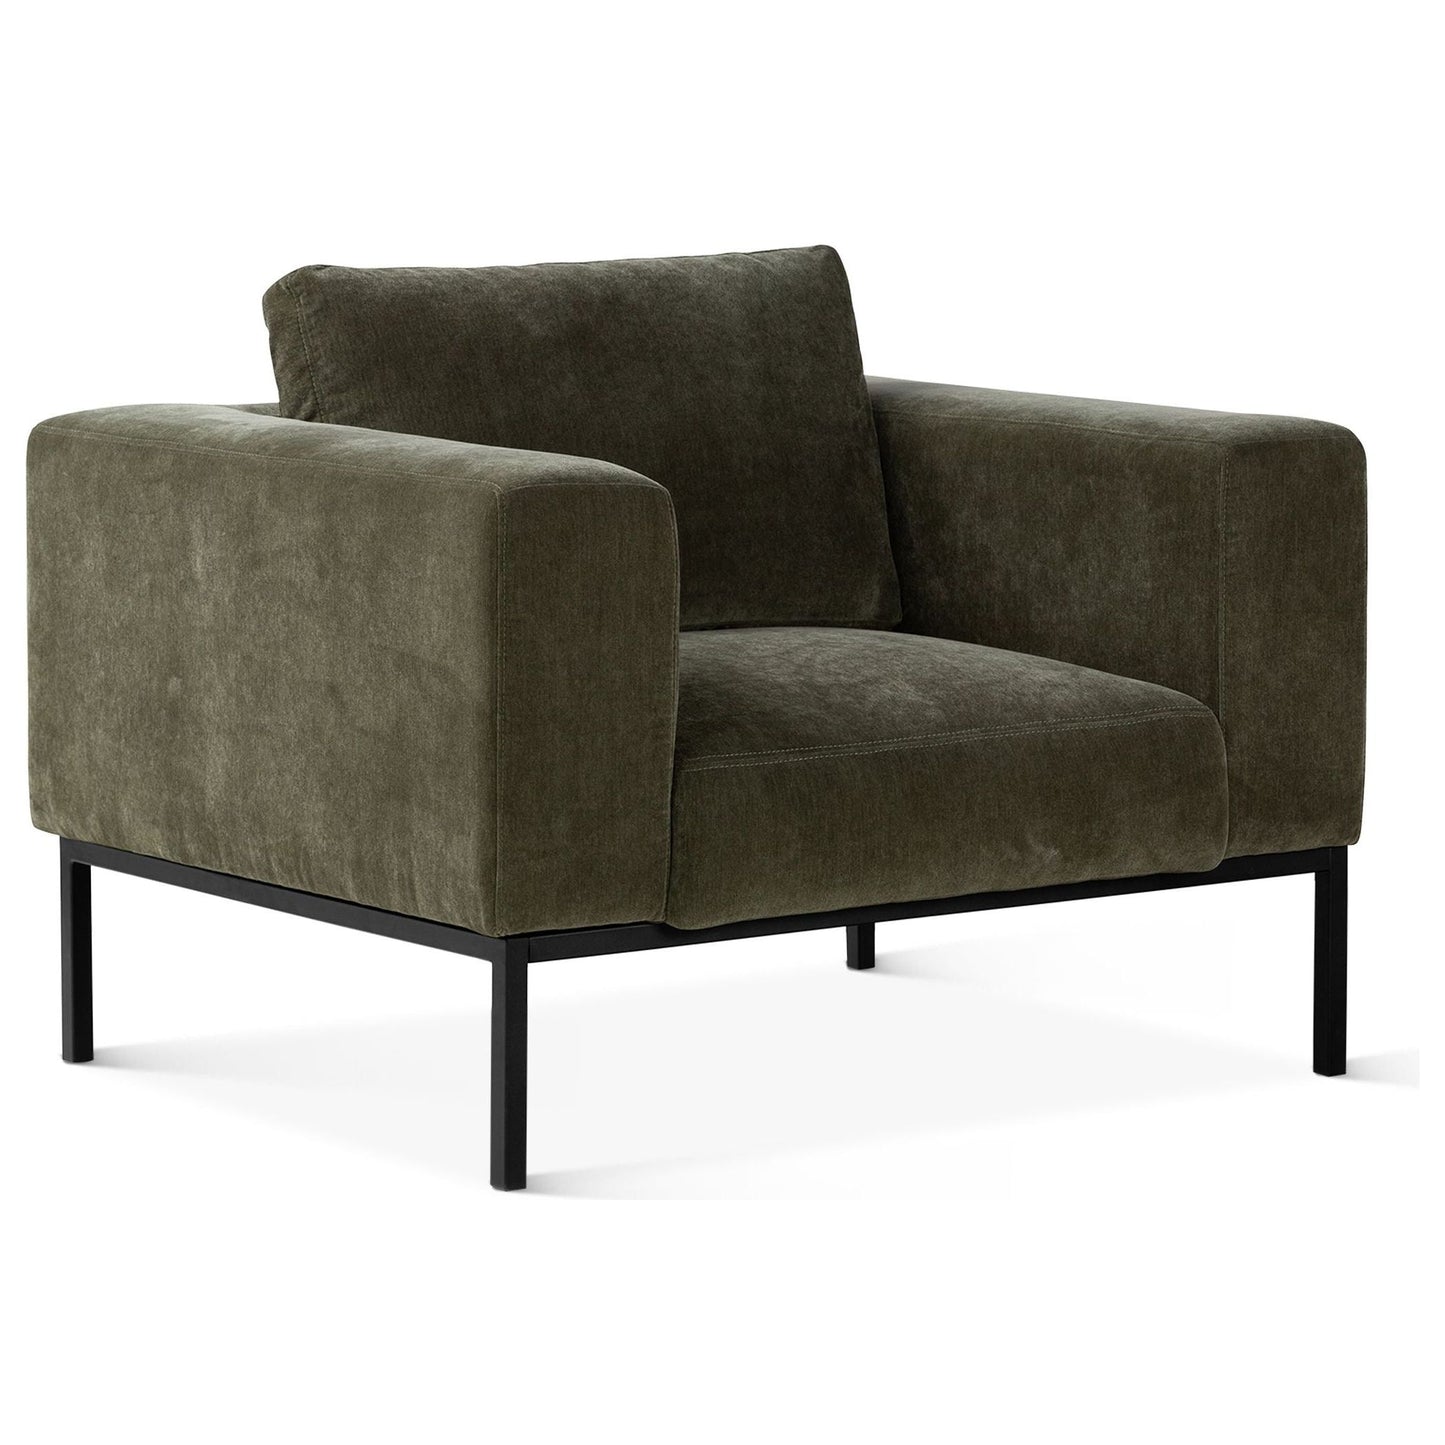 A modern olive green chenille fabric armchair with plush cushions and a minimalist black metal frame, set against a plain white background. The Stewart Accent Chair has a sleek, contemporary aesthetic with clean lines and a luxurious texture.